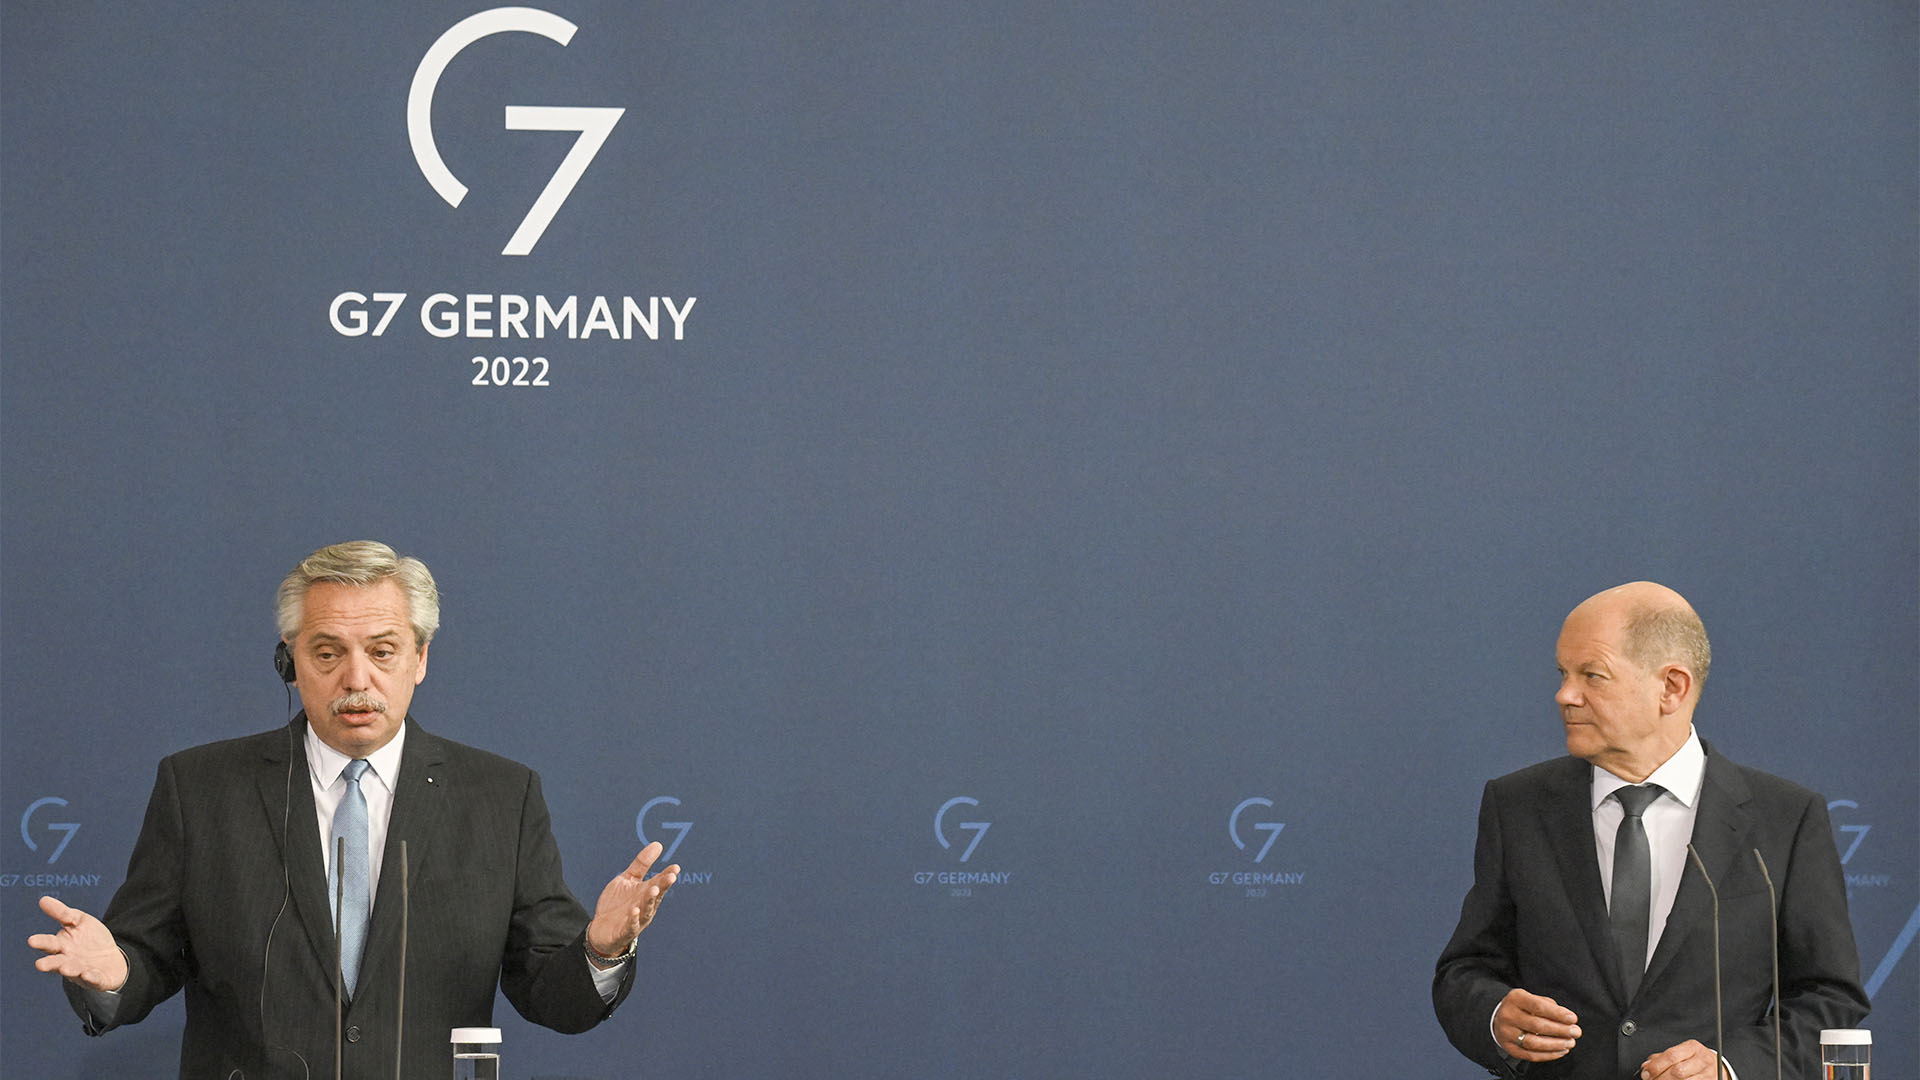 Alberto Angel Fernandez and Olaf Scholz during the press conference at the German Chancellery